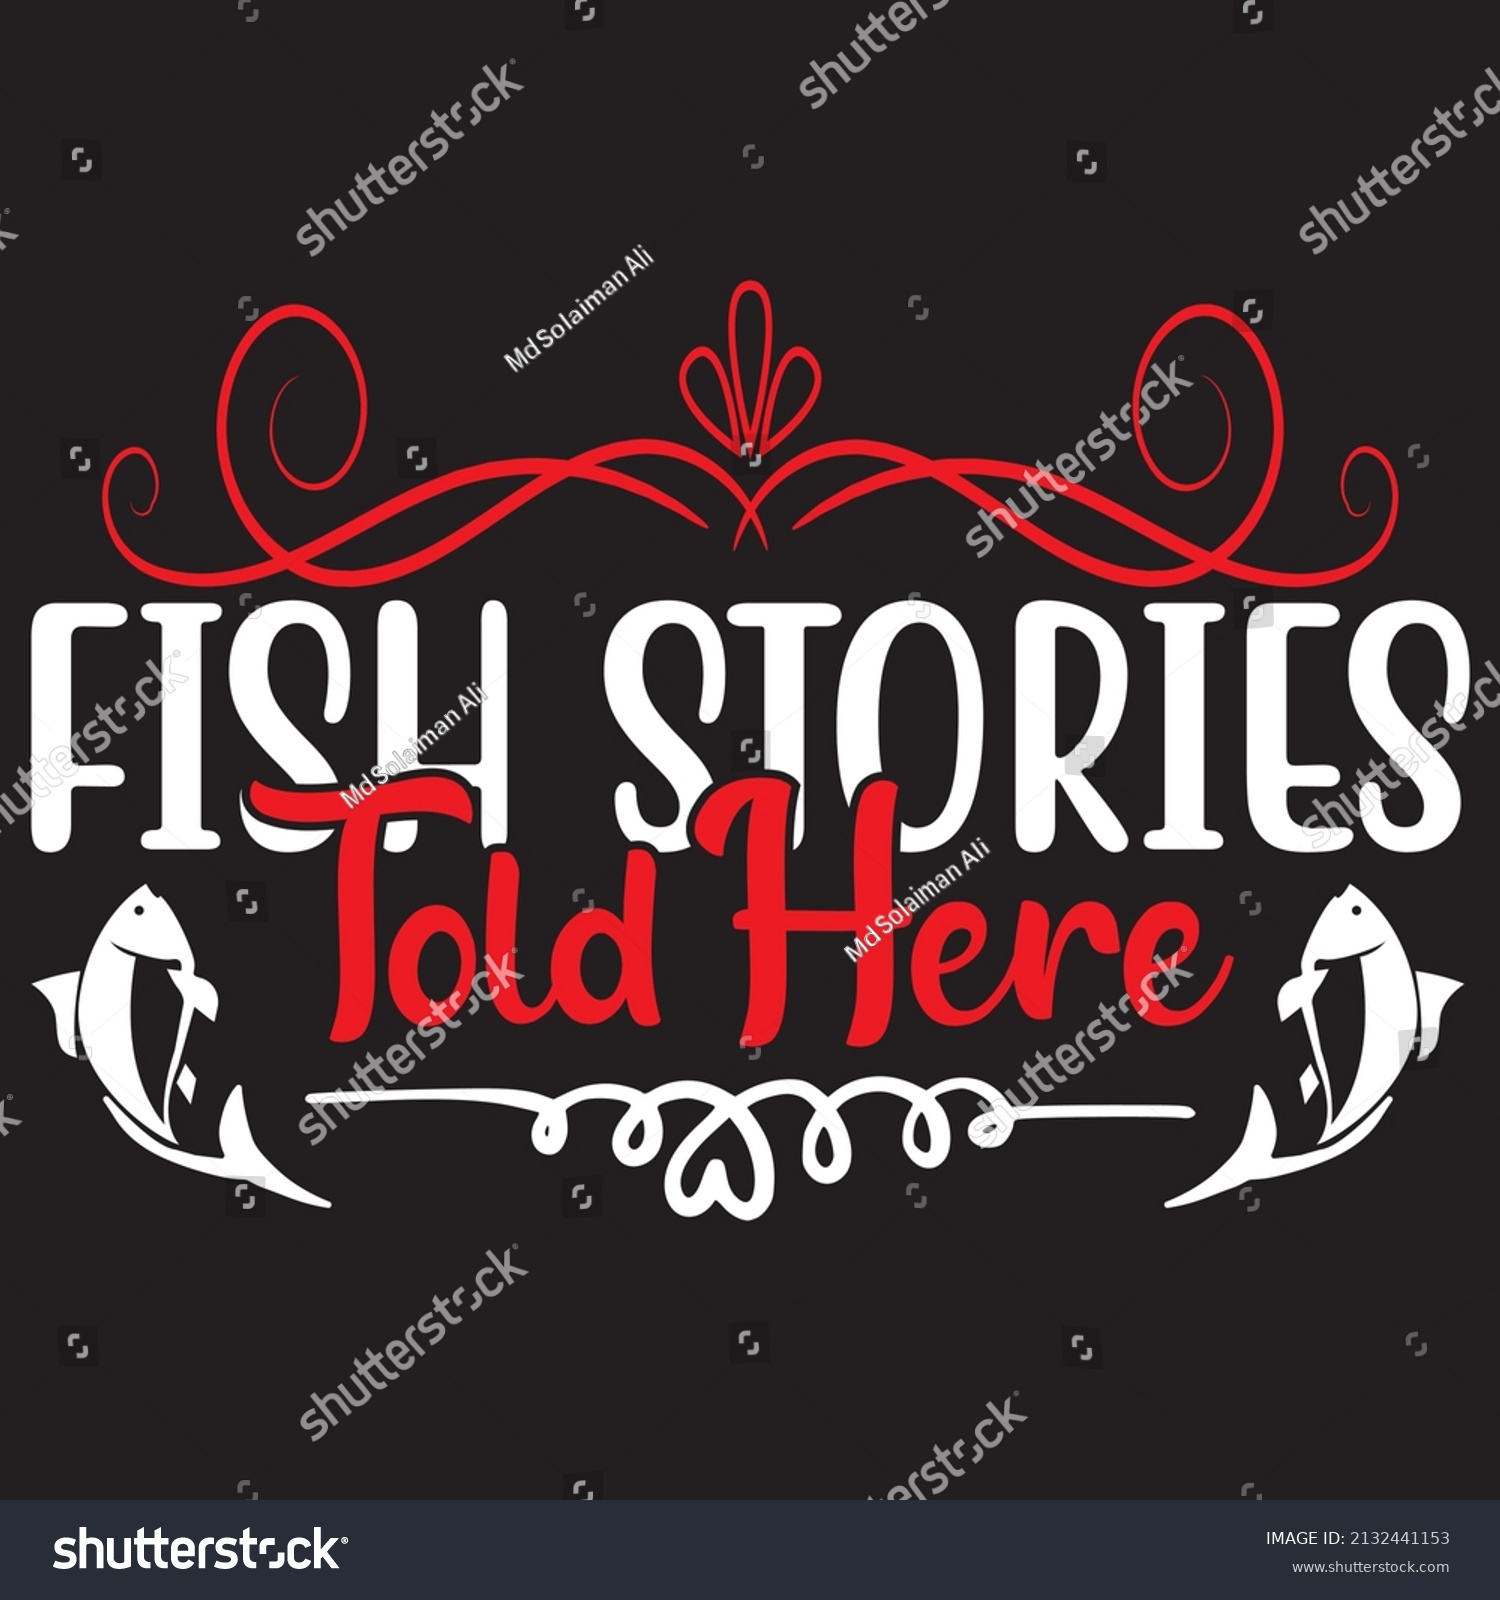 SVG of Fish Stories Told Here, fishing svg design. svg